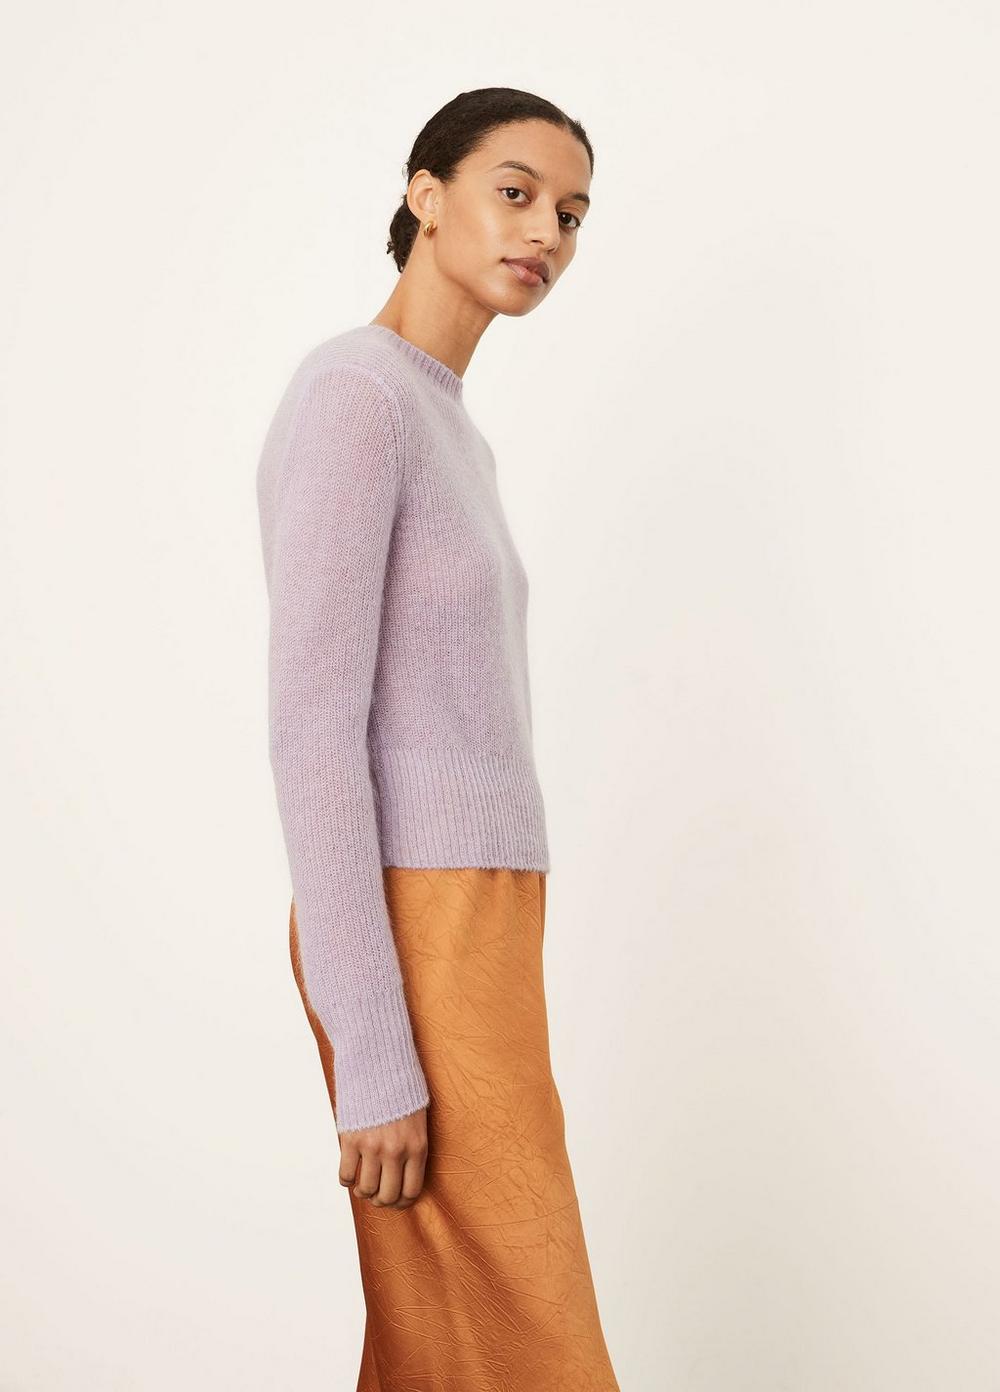 Ribbed Featherweight Crew Neck Sweater in Vince Sold Out Products | Vince